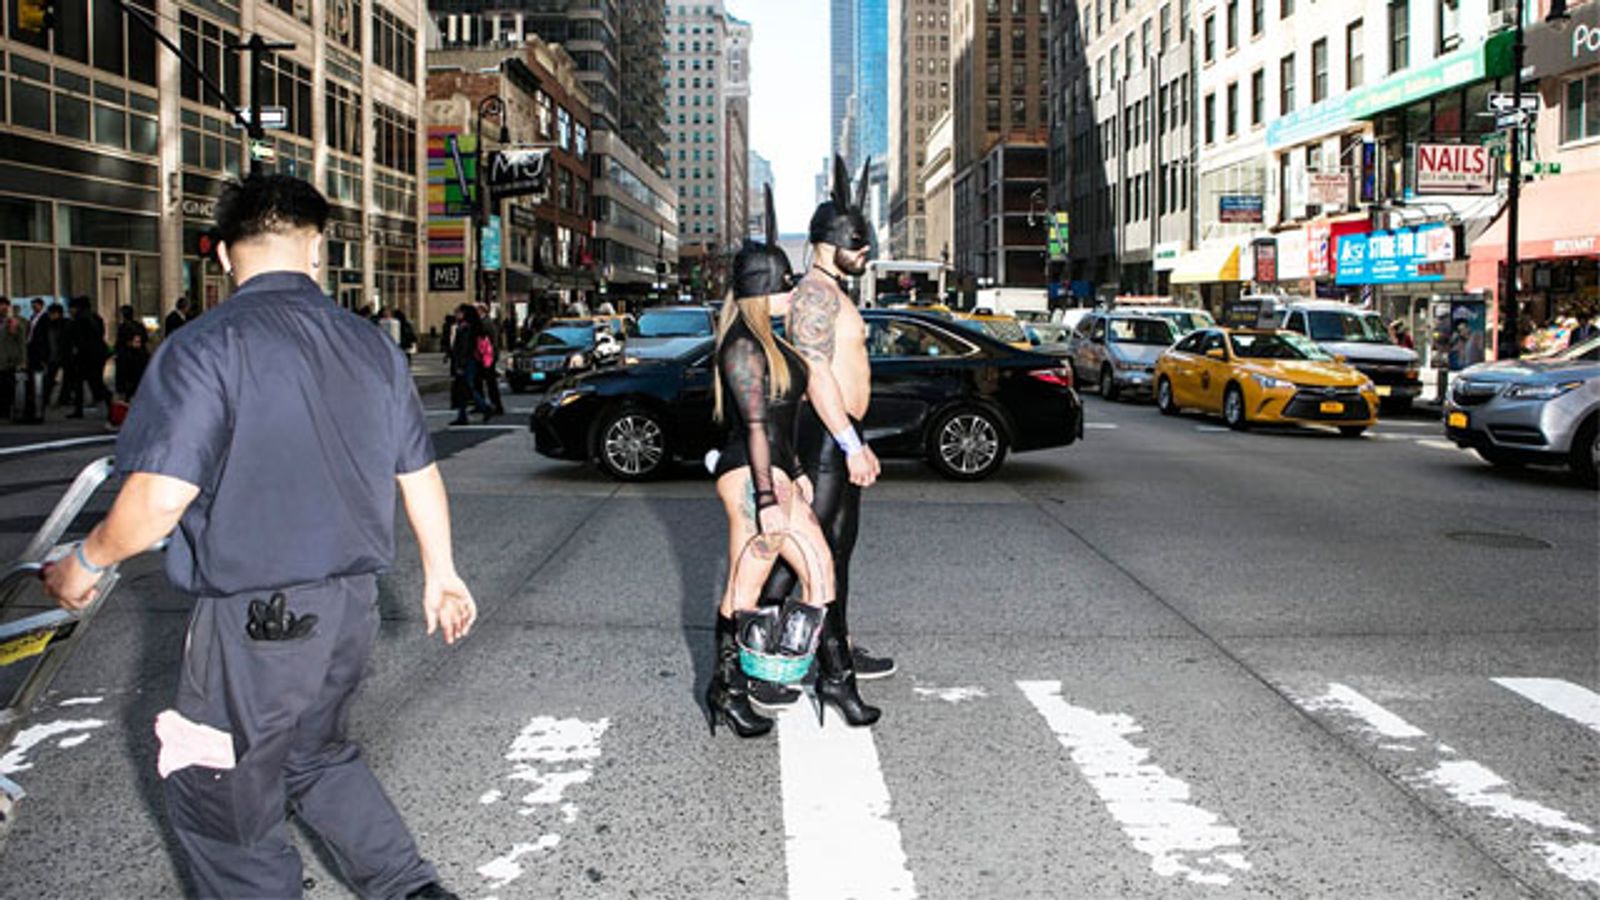 Hot Octopuss Has X-Rated Easter Bunnies Deliver ‘Eggs’ Around NYC